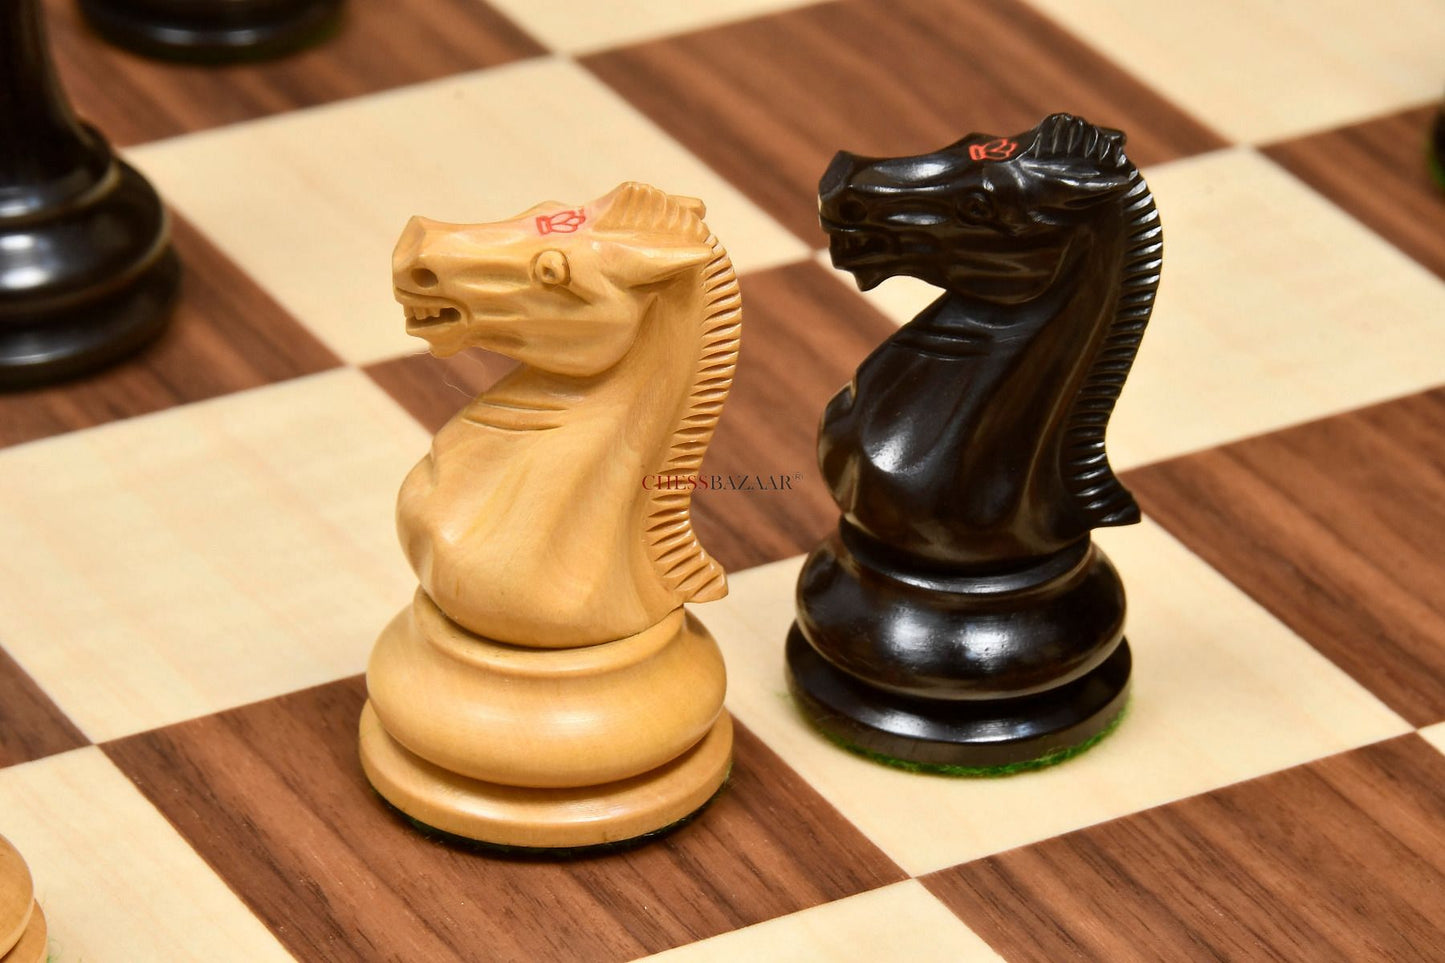 Reproduced 1880s-90s Circa Lasker Staunton Pattern Antique Chess Pieces in Ebony / Boxwood with King Side Stamping - 3.75" King